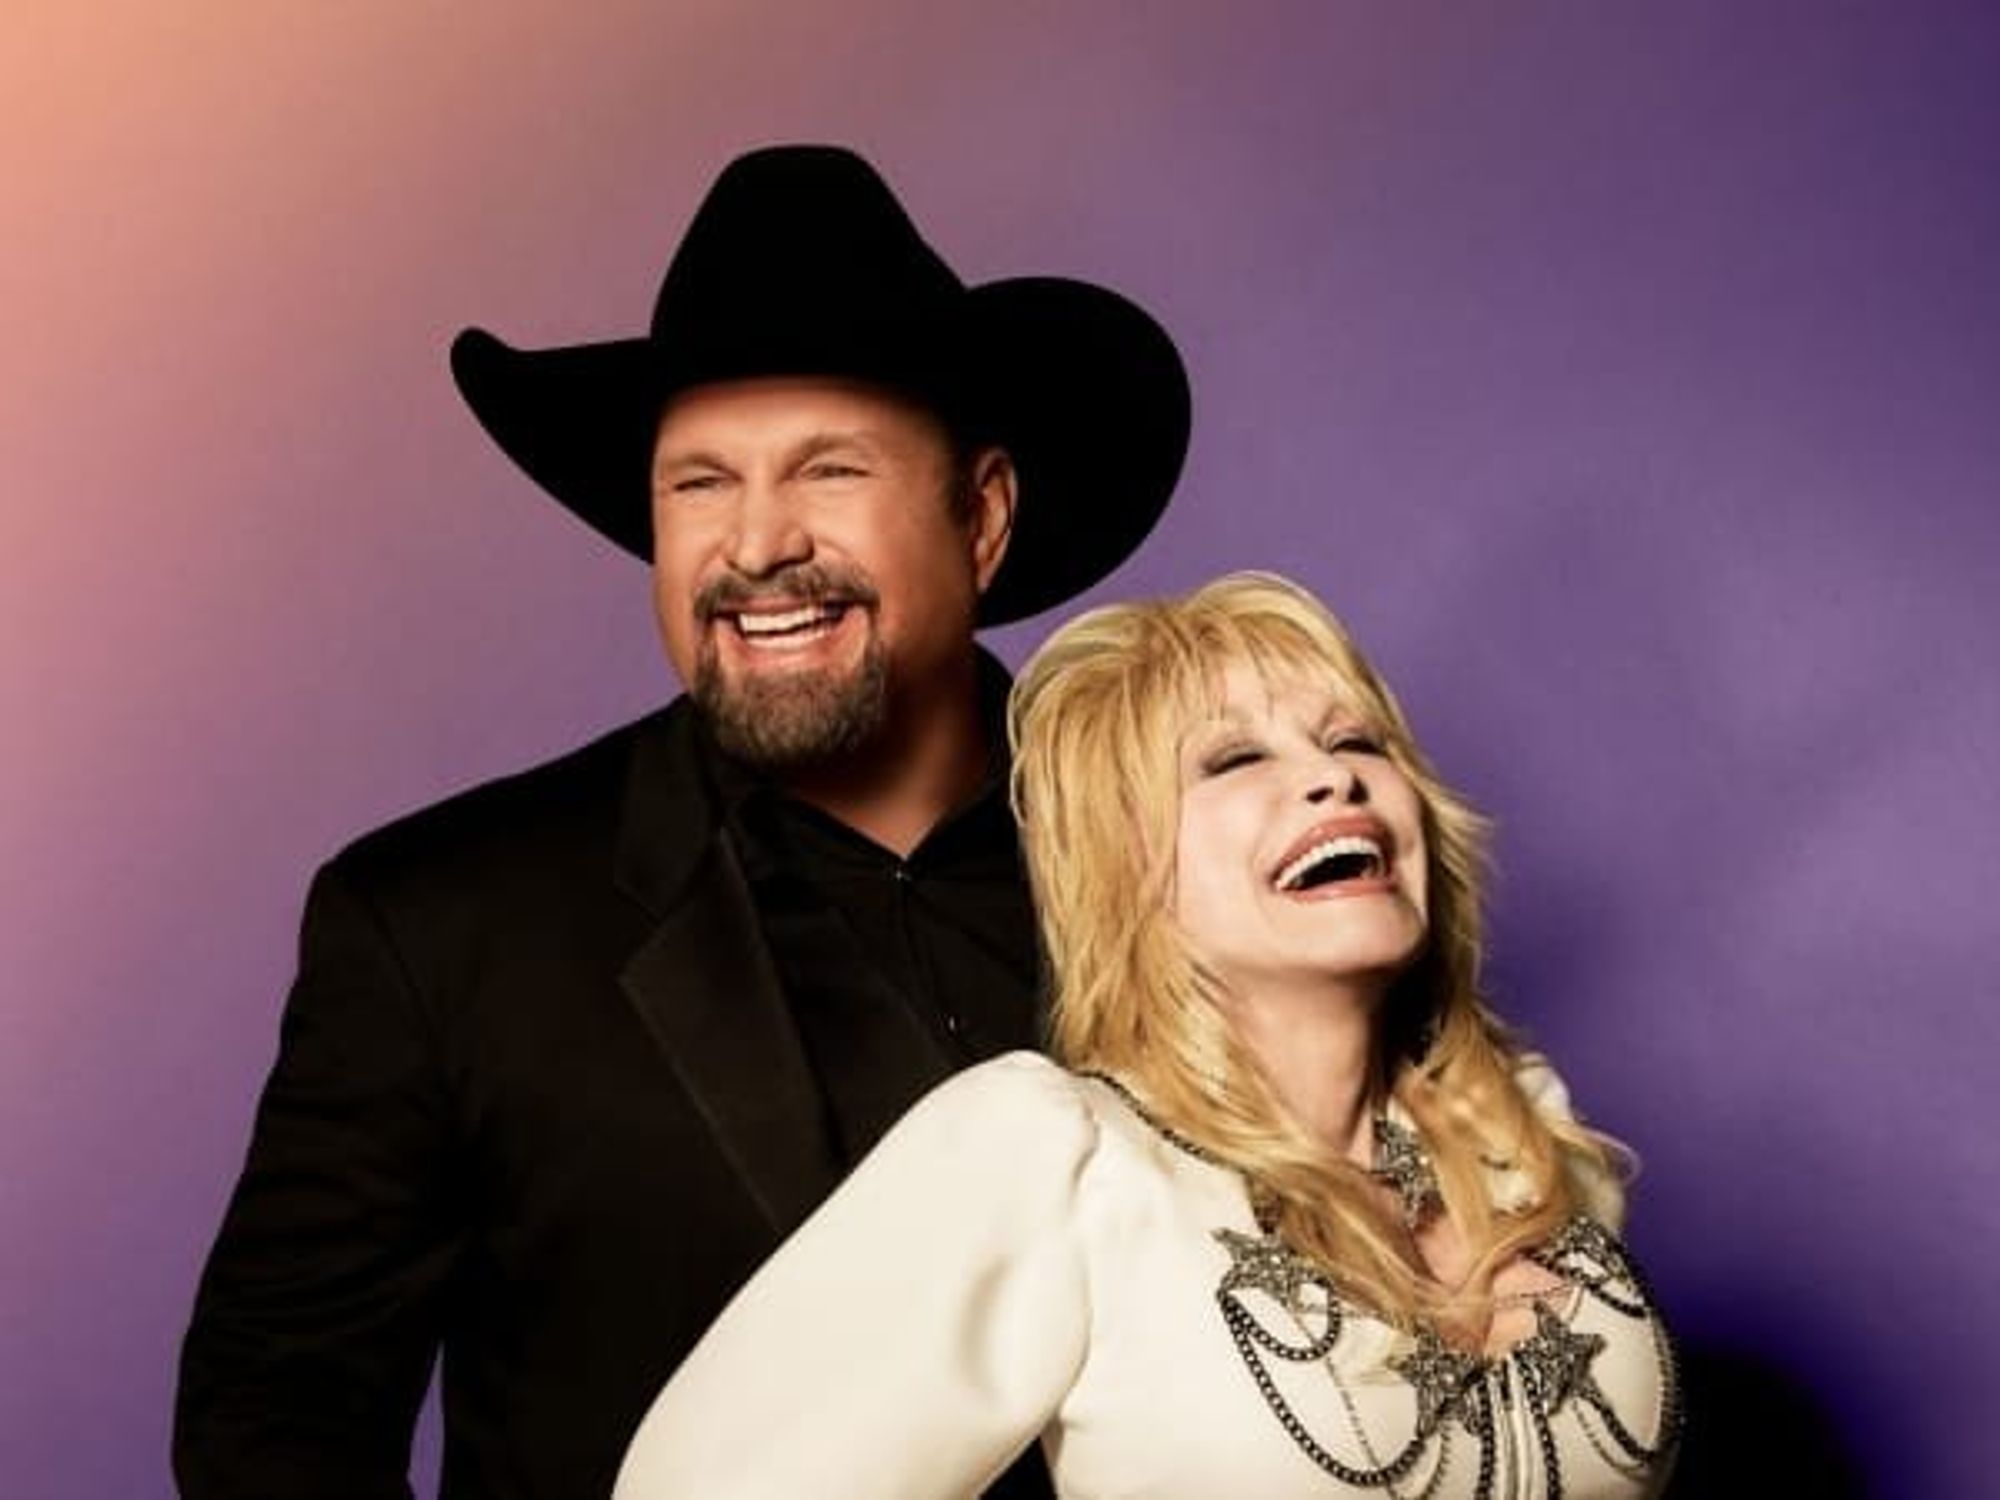 Garth Brooks and Dolly Parton will host the 2023 Academy of Country Music Awards